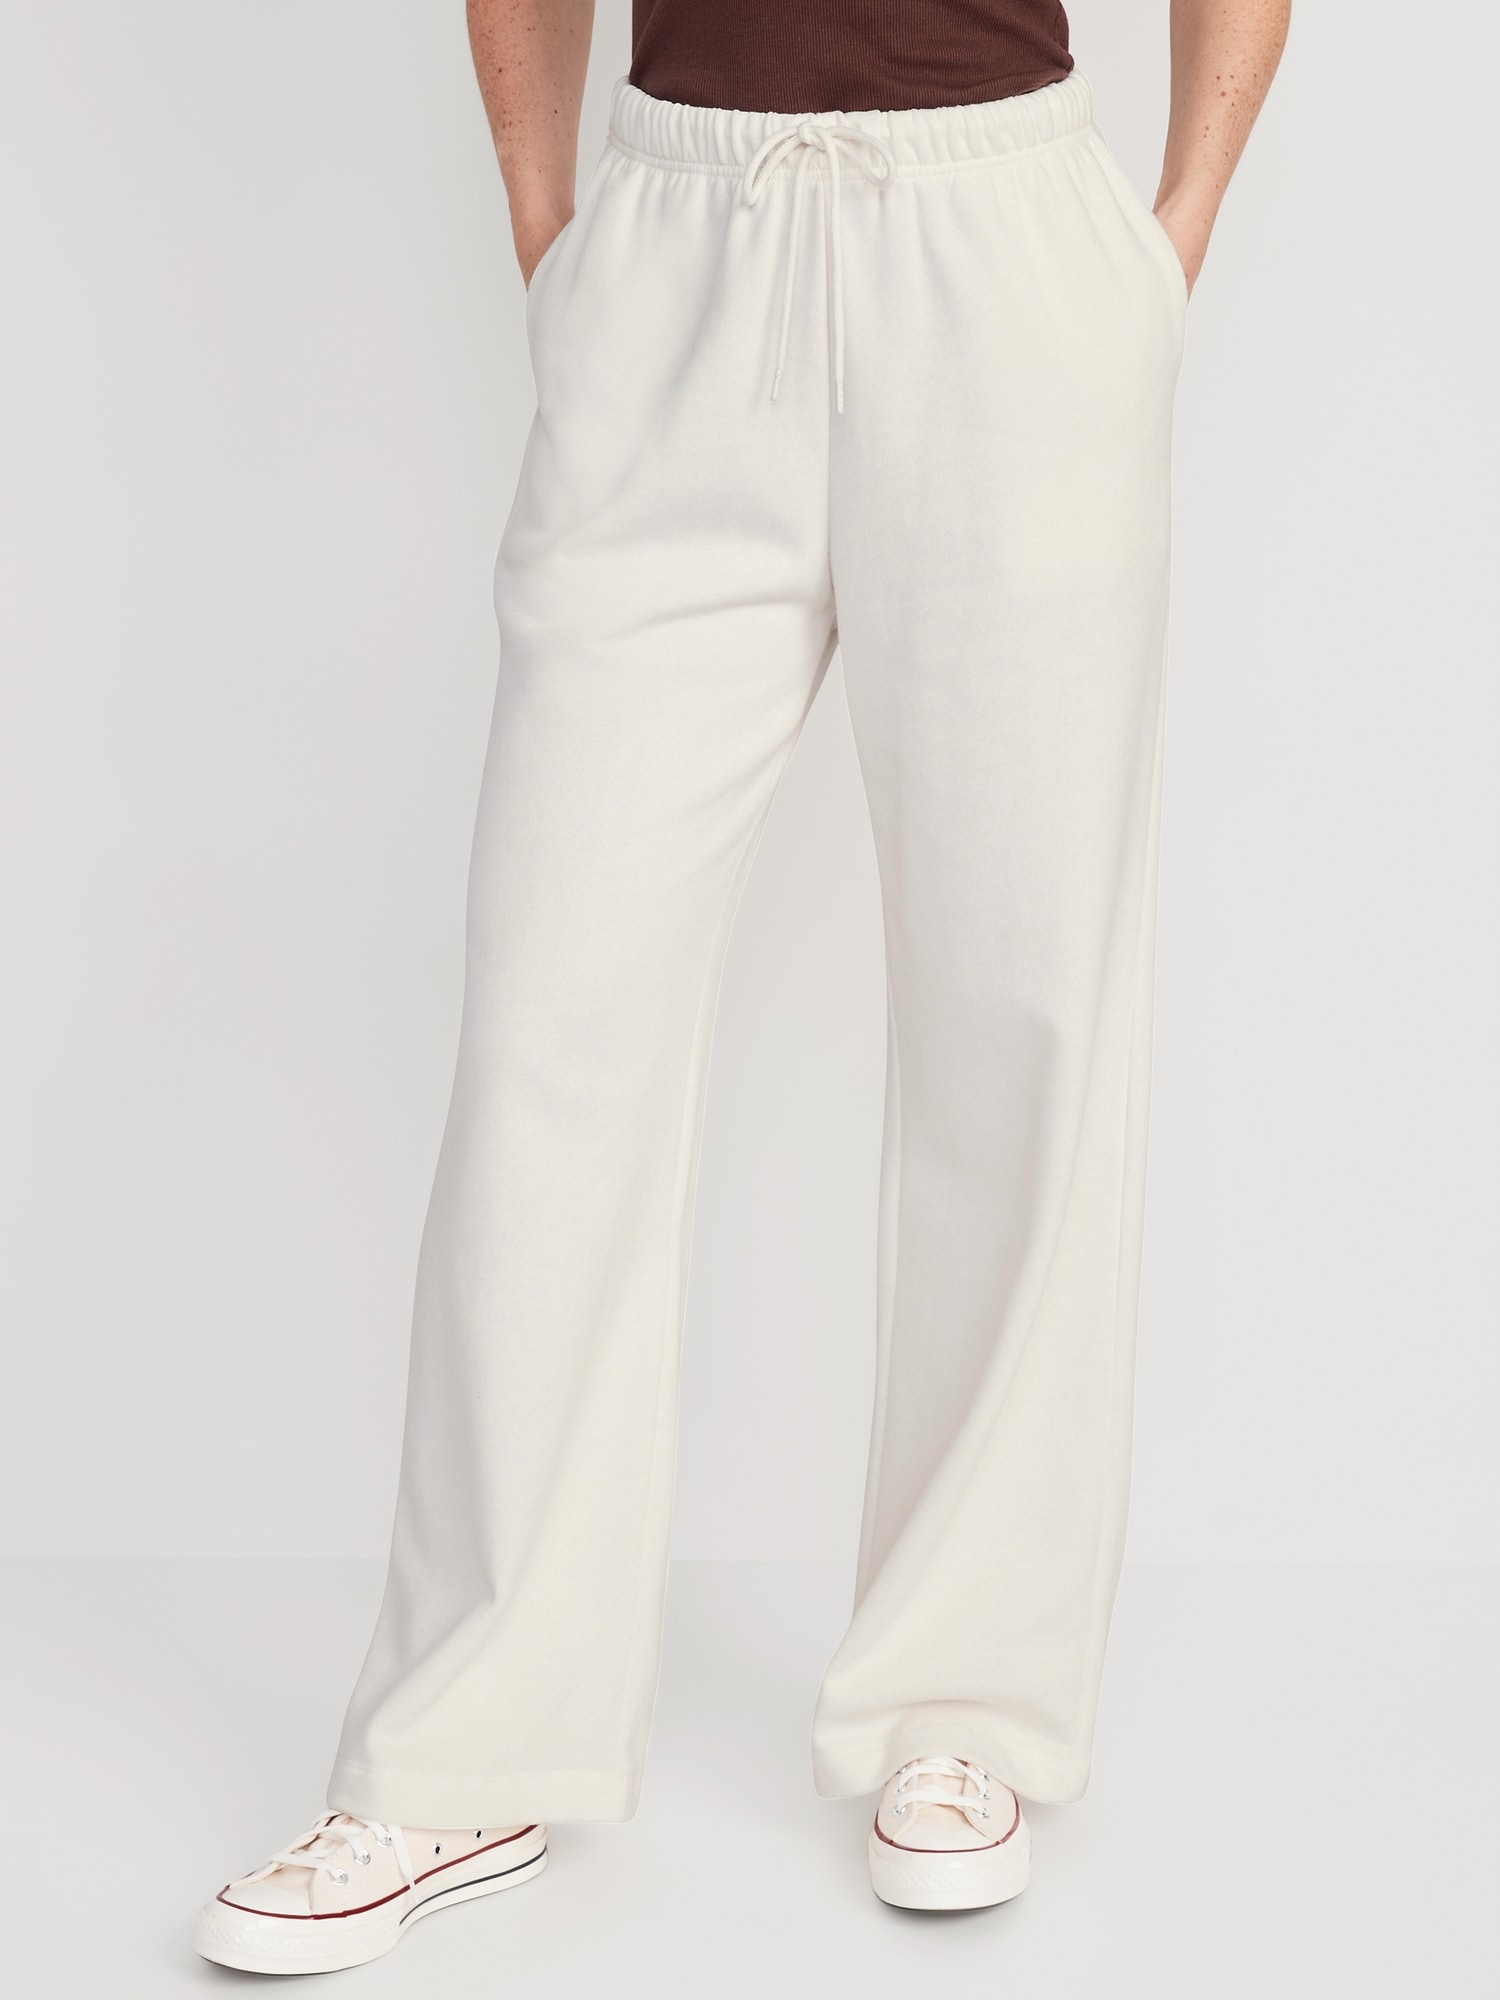 Old Navy Extra High-Waisted Vintage Straight Lounge Sweatpants for Women white. 1